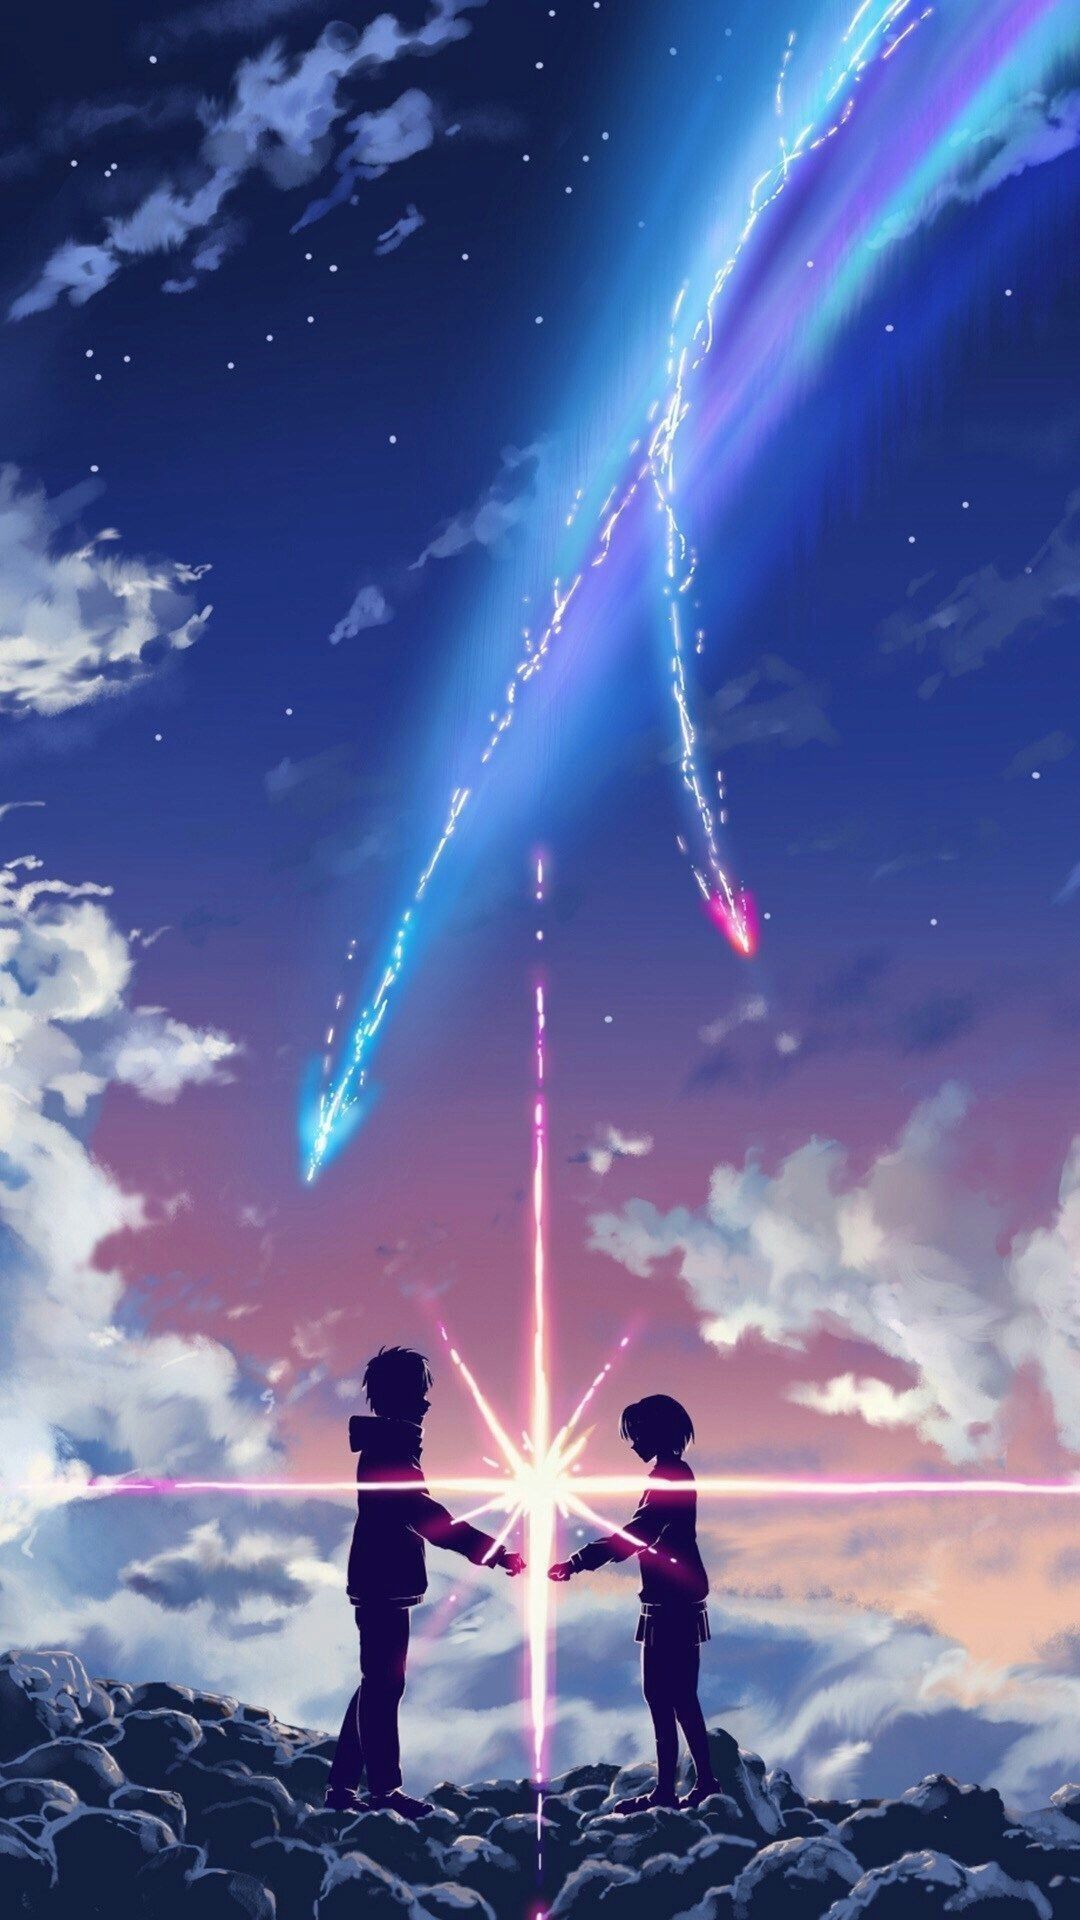 Aesthetic Anime Wallpapers and Backgrounds